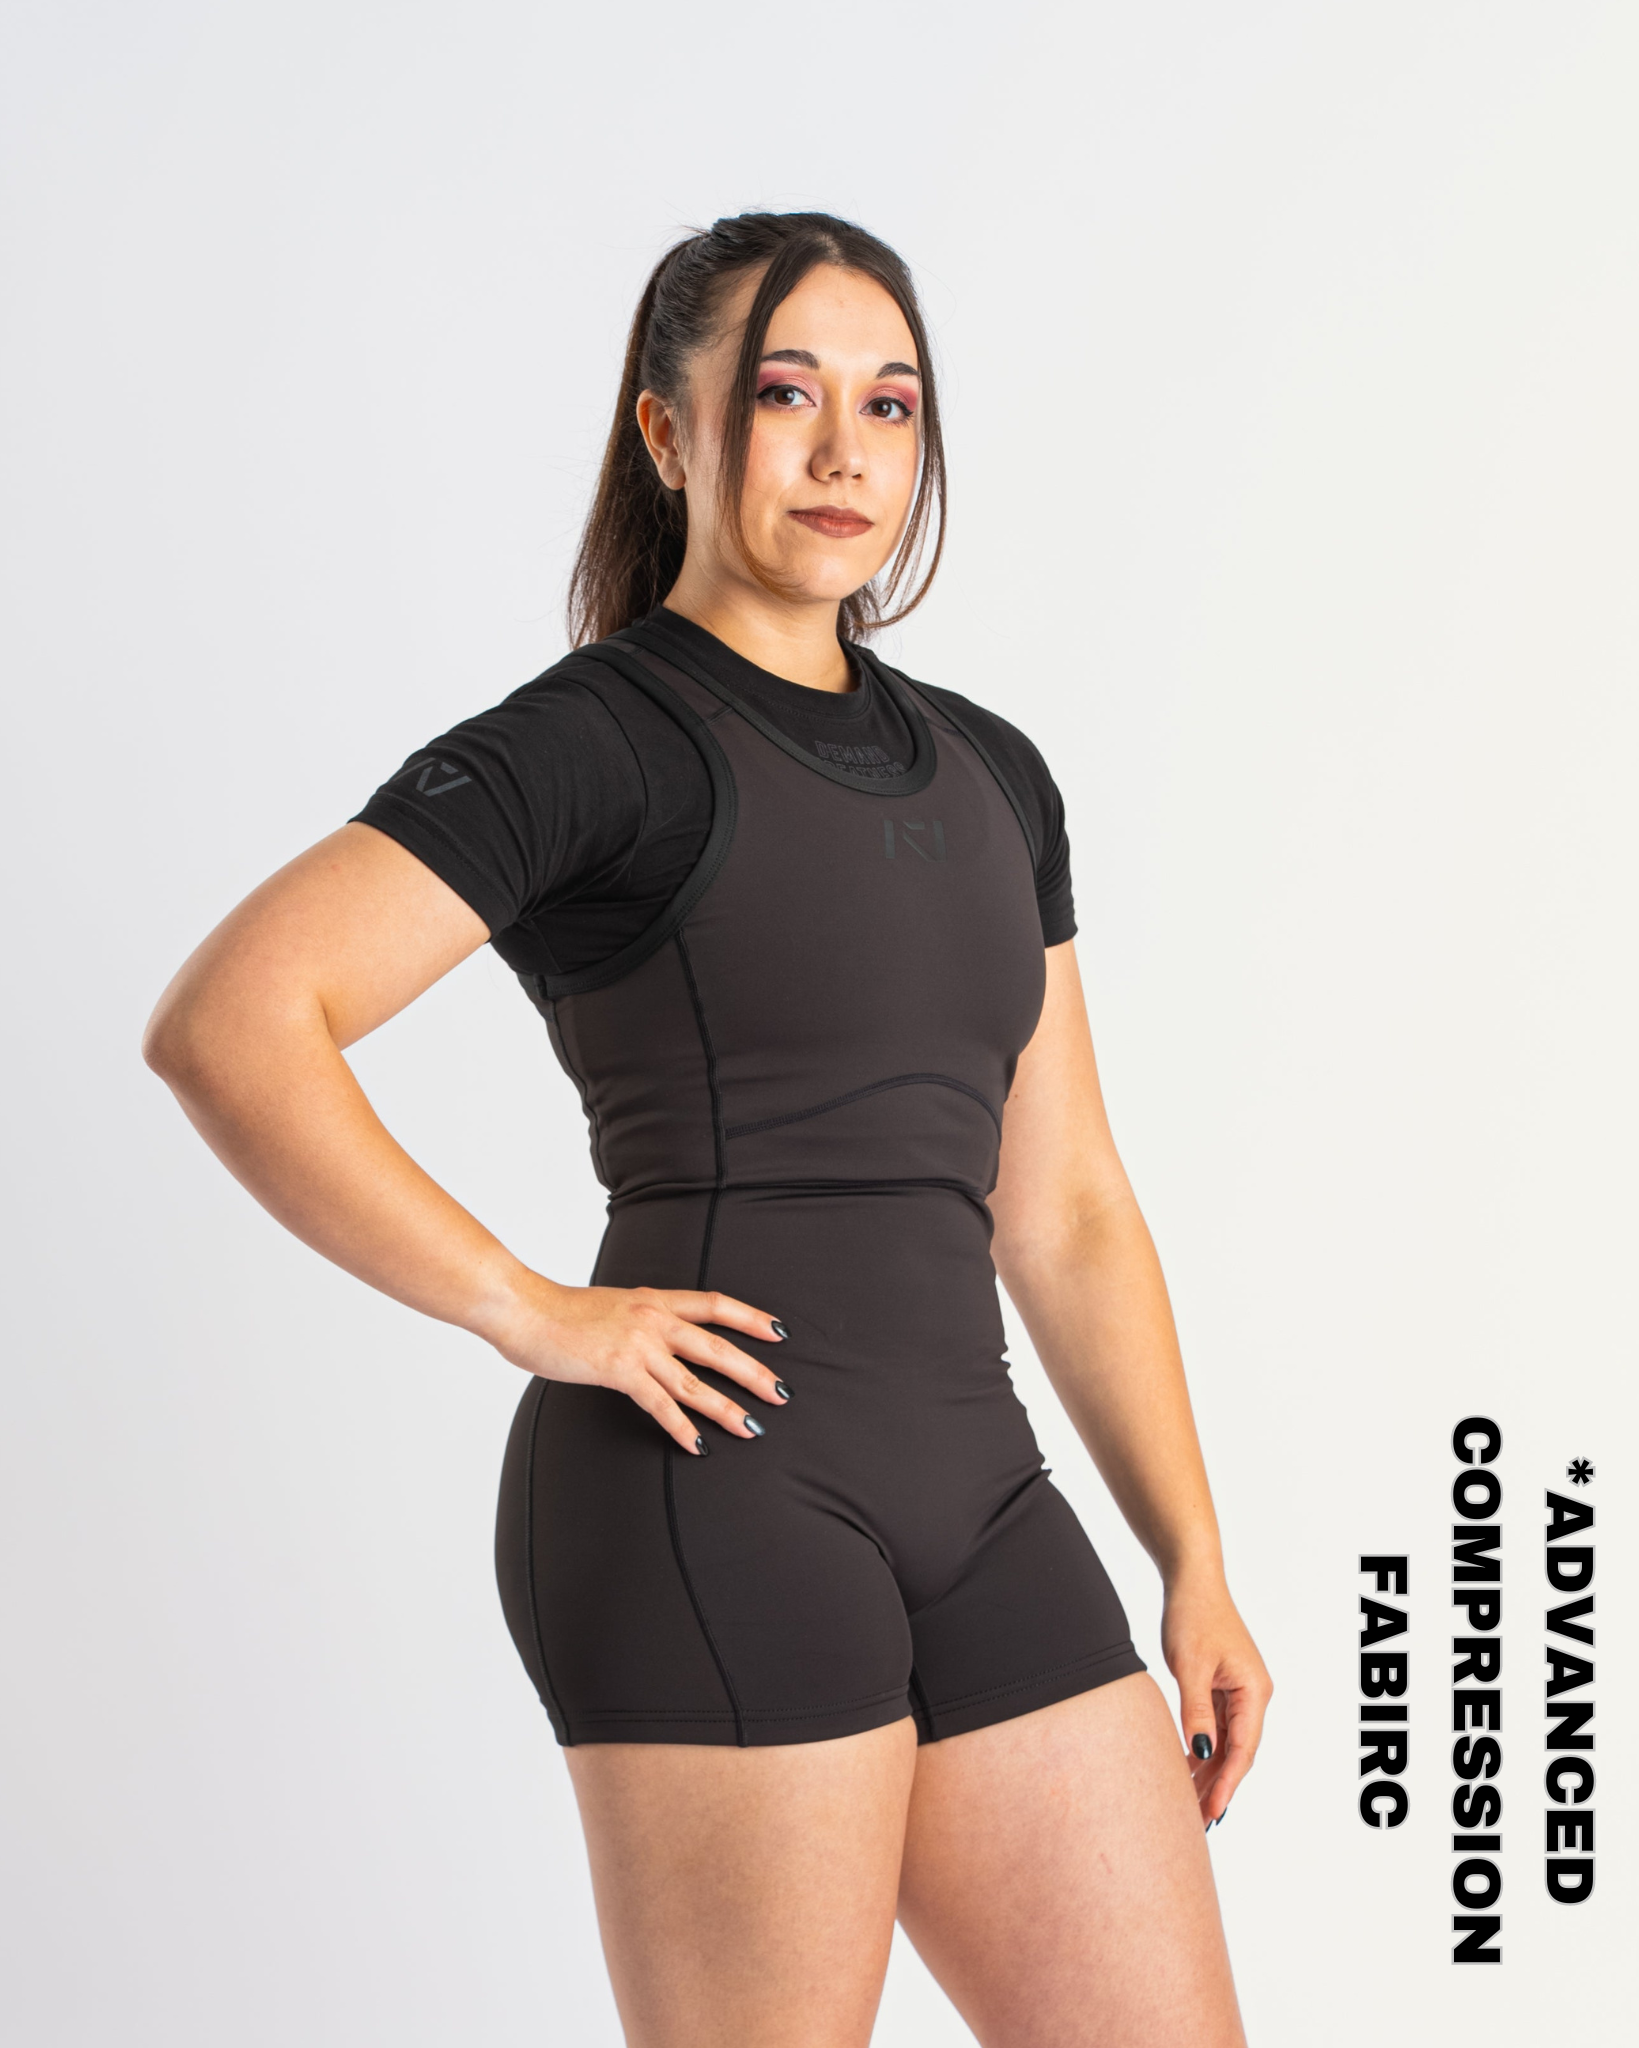 Our IPF APPROVED Rausch Singlets are designed to support the strength and power of an lifter.  A racerback design with advanced compression fabric provides powerlifters ultimate support whilst on the platform. IPF Approved Kit includes Rausch Powerlifting Singlet, A7 Meet Shirt, A7 Zebra Wrist Wraps, A7 Deadlift Socks, Hourglass Knee Sleeves (Stiff Knee Sleeves and Rigor Mortis Knee Sleeves). Genouill�res powerlifting shipping to France, Spain, Ireland, Germany, Italy, Sweden and EU.